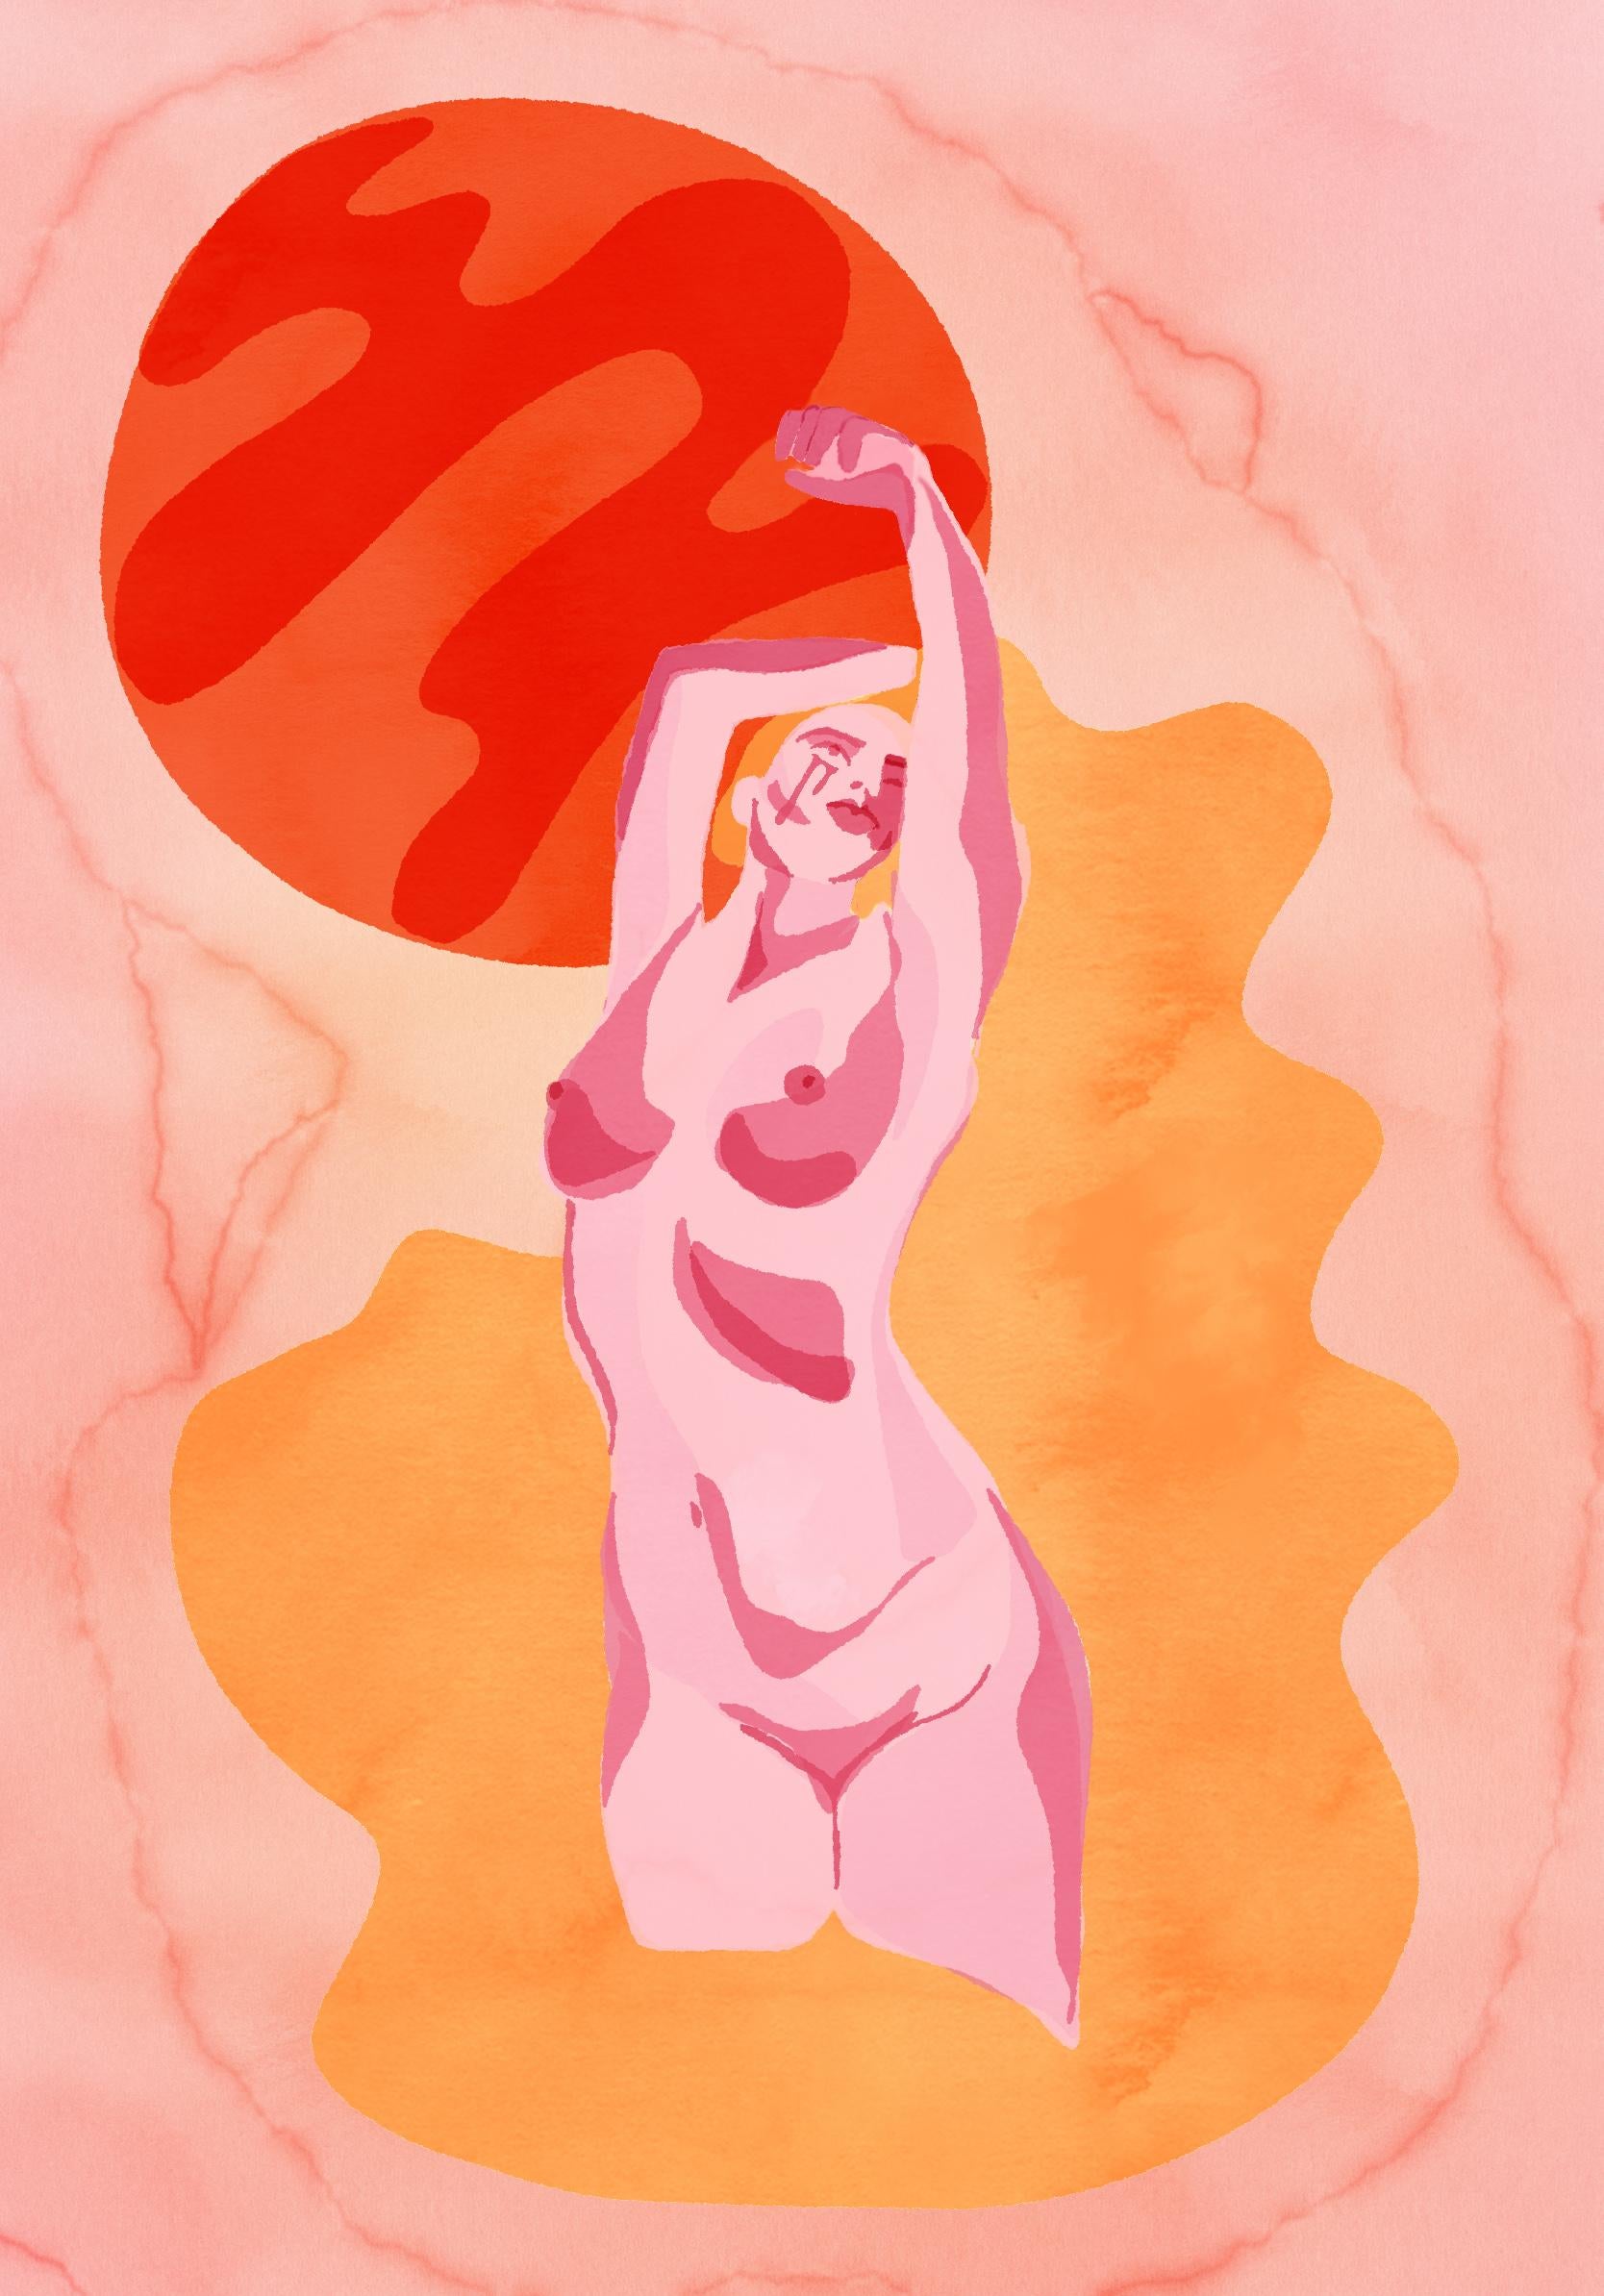 "Tears From Mars" (2021) by SarahGrace
Digital art print on archival paper, Figurative drawing, Portrait, Woman, Nude, Red, Peach, Pink and Orange
Hand-signed by artist
Framing Available
Certificate of Authenticity Included